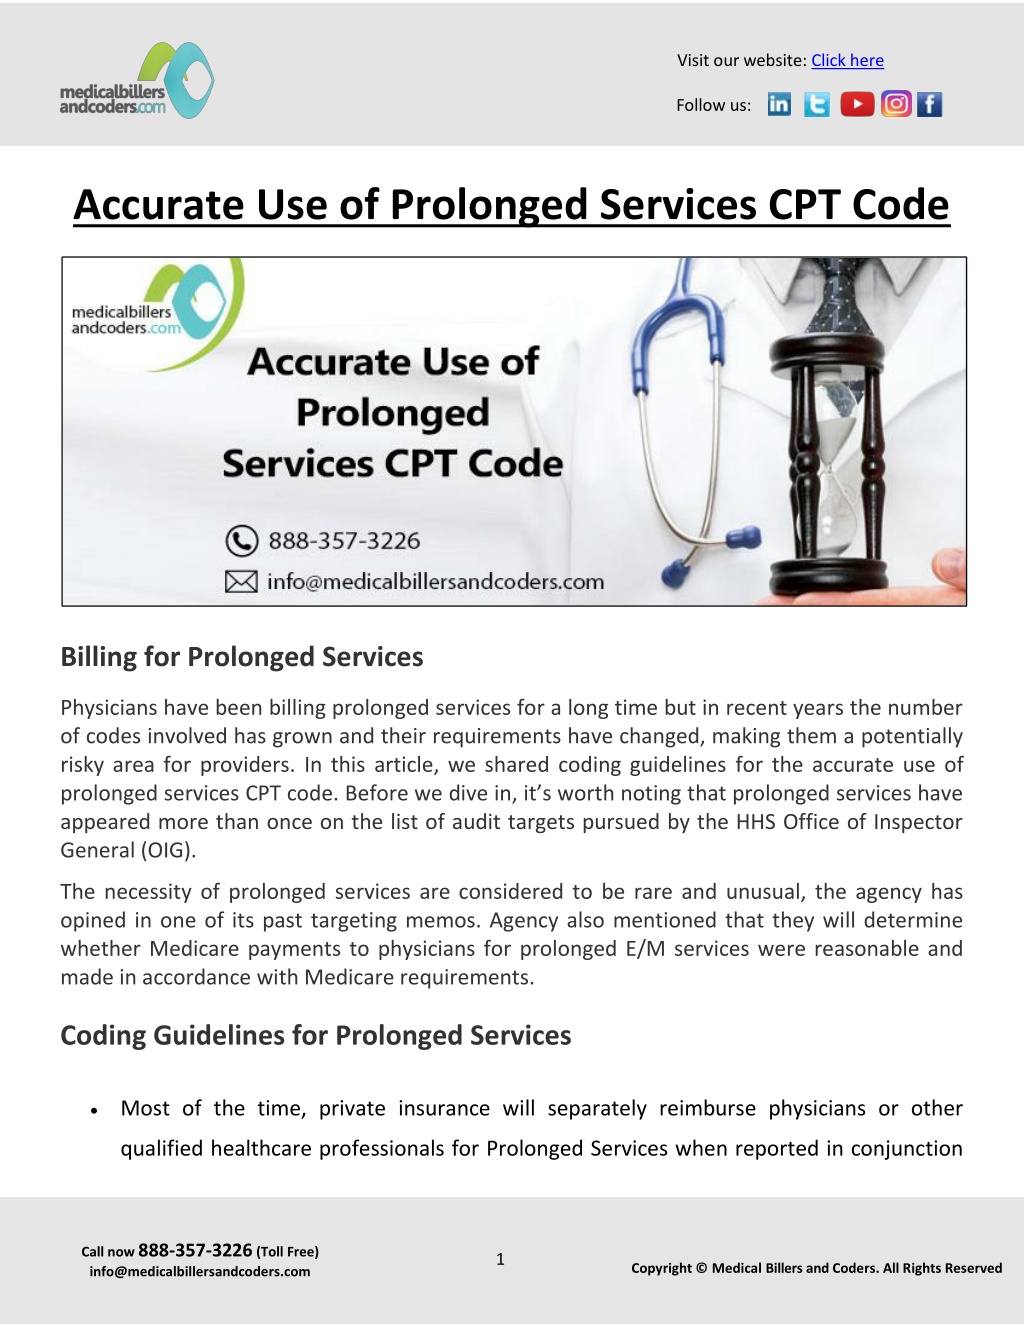 PPT Accurate Use of Prolonged Services CPT Code PowerPoint